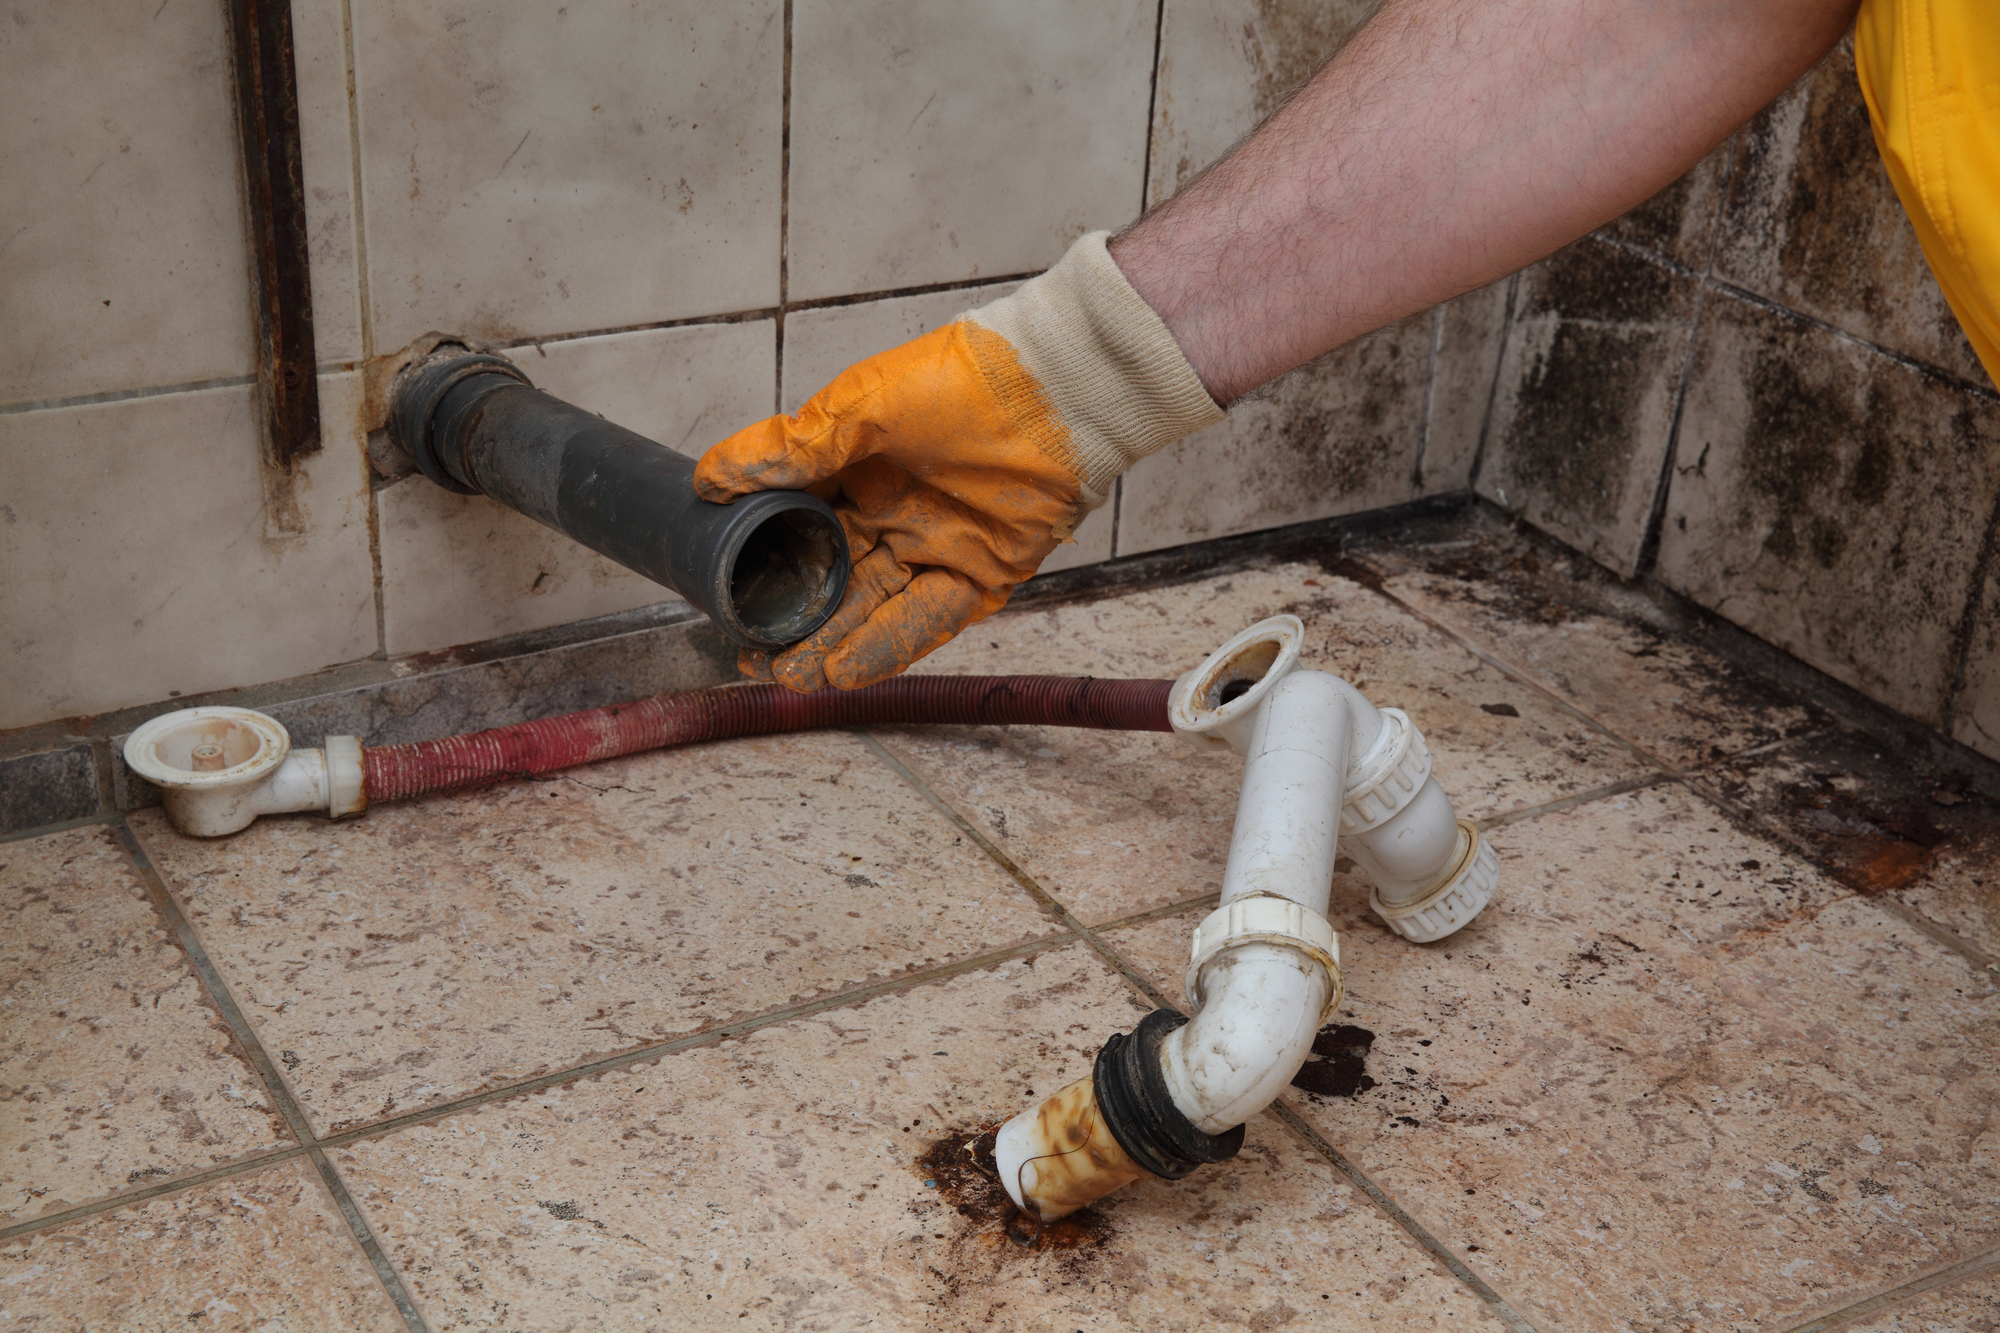 How to Identify and Fix Common Household Plumbing Problems